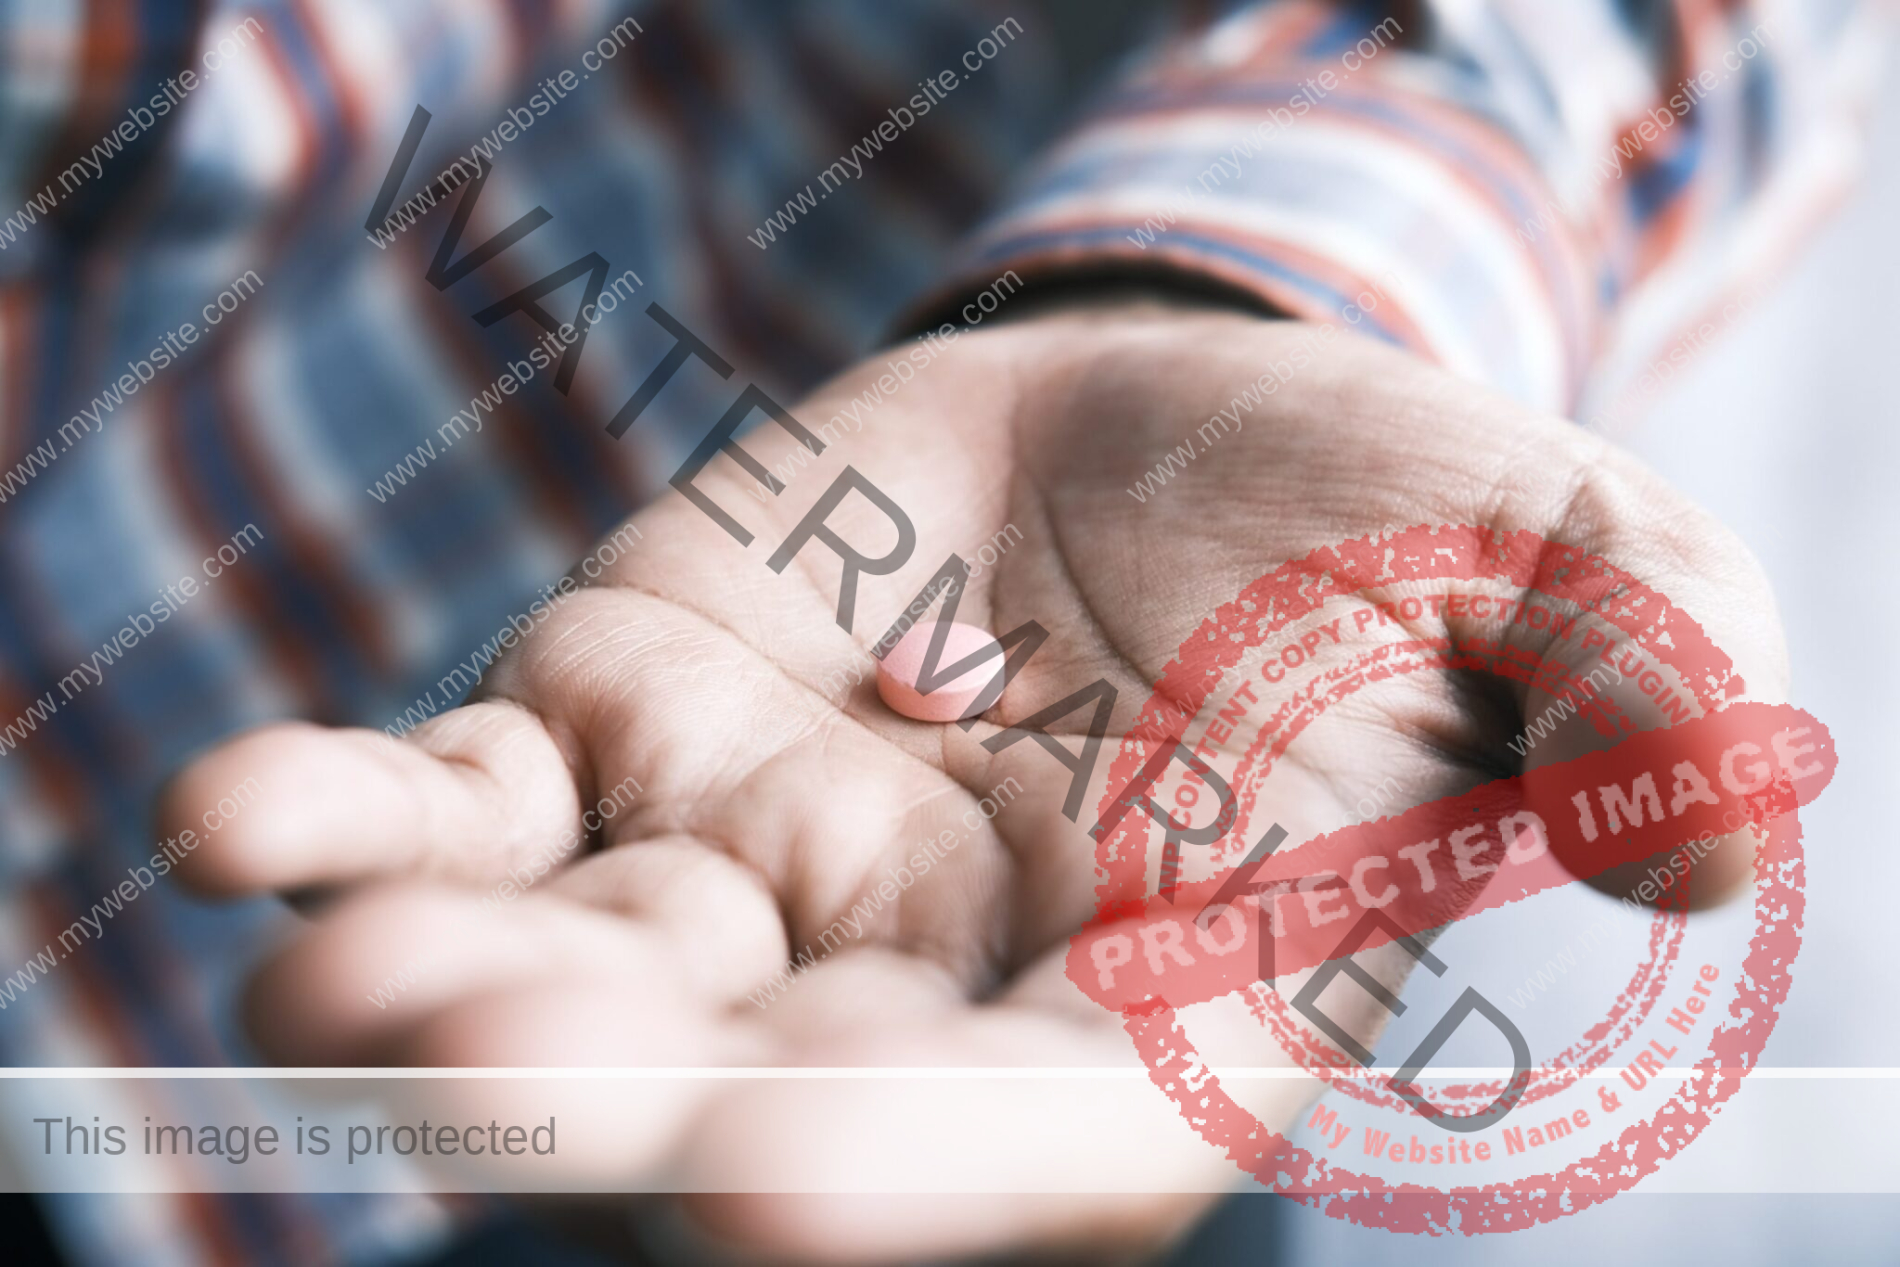 man's open hand with a medication pill in it